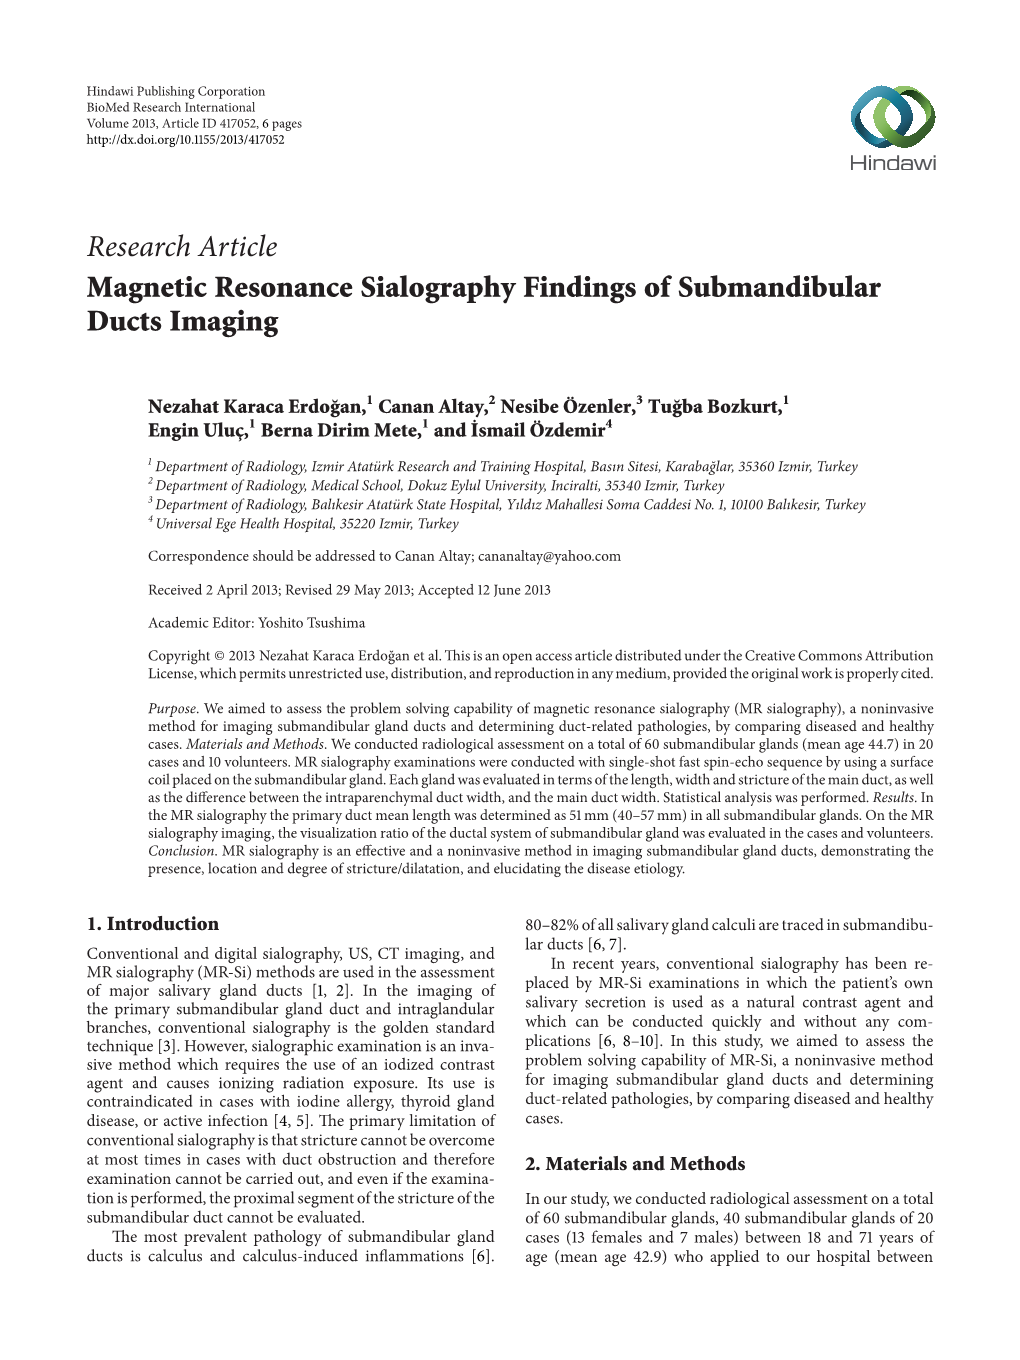 Research Article Magnetic Resonance Sialography Findings of Submandibular Ducts Imaging